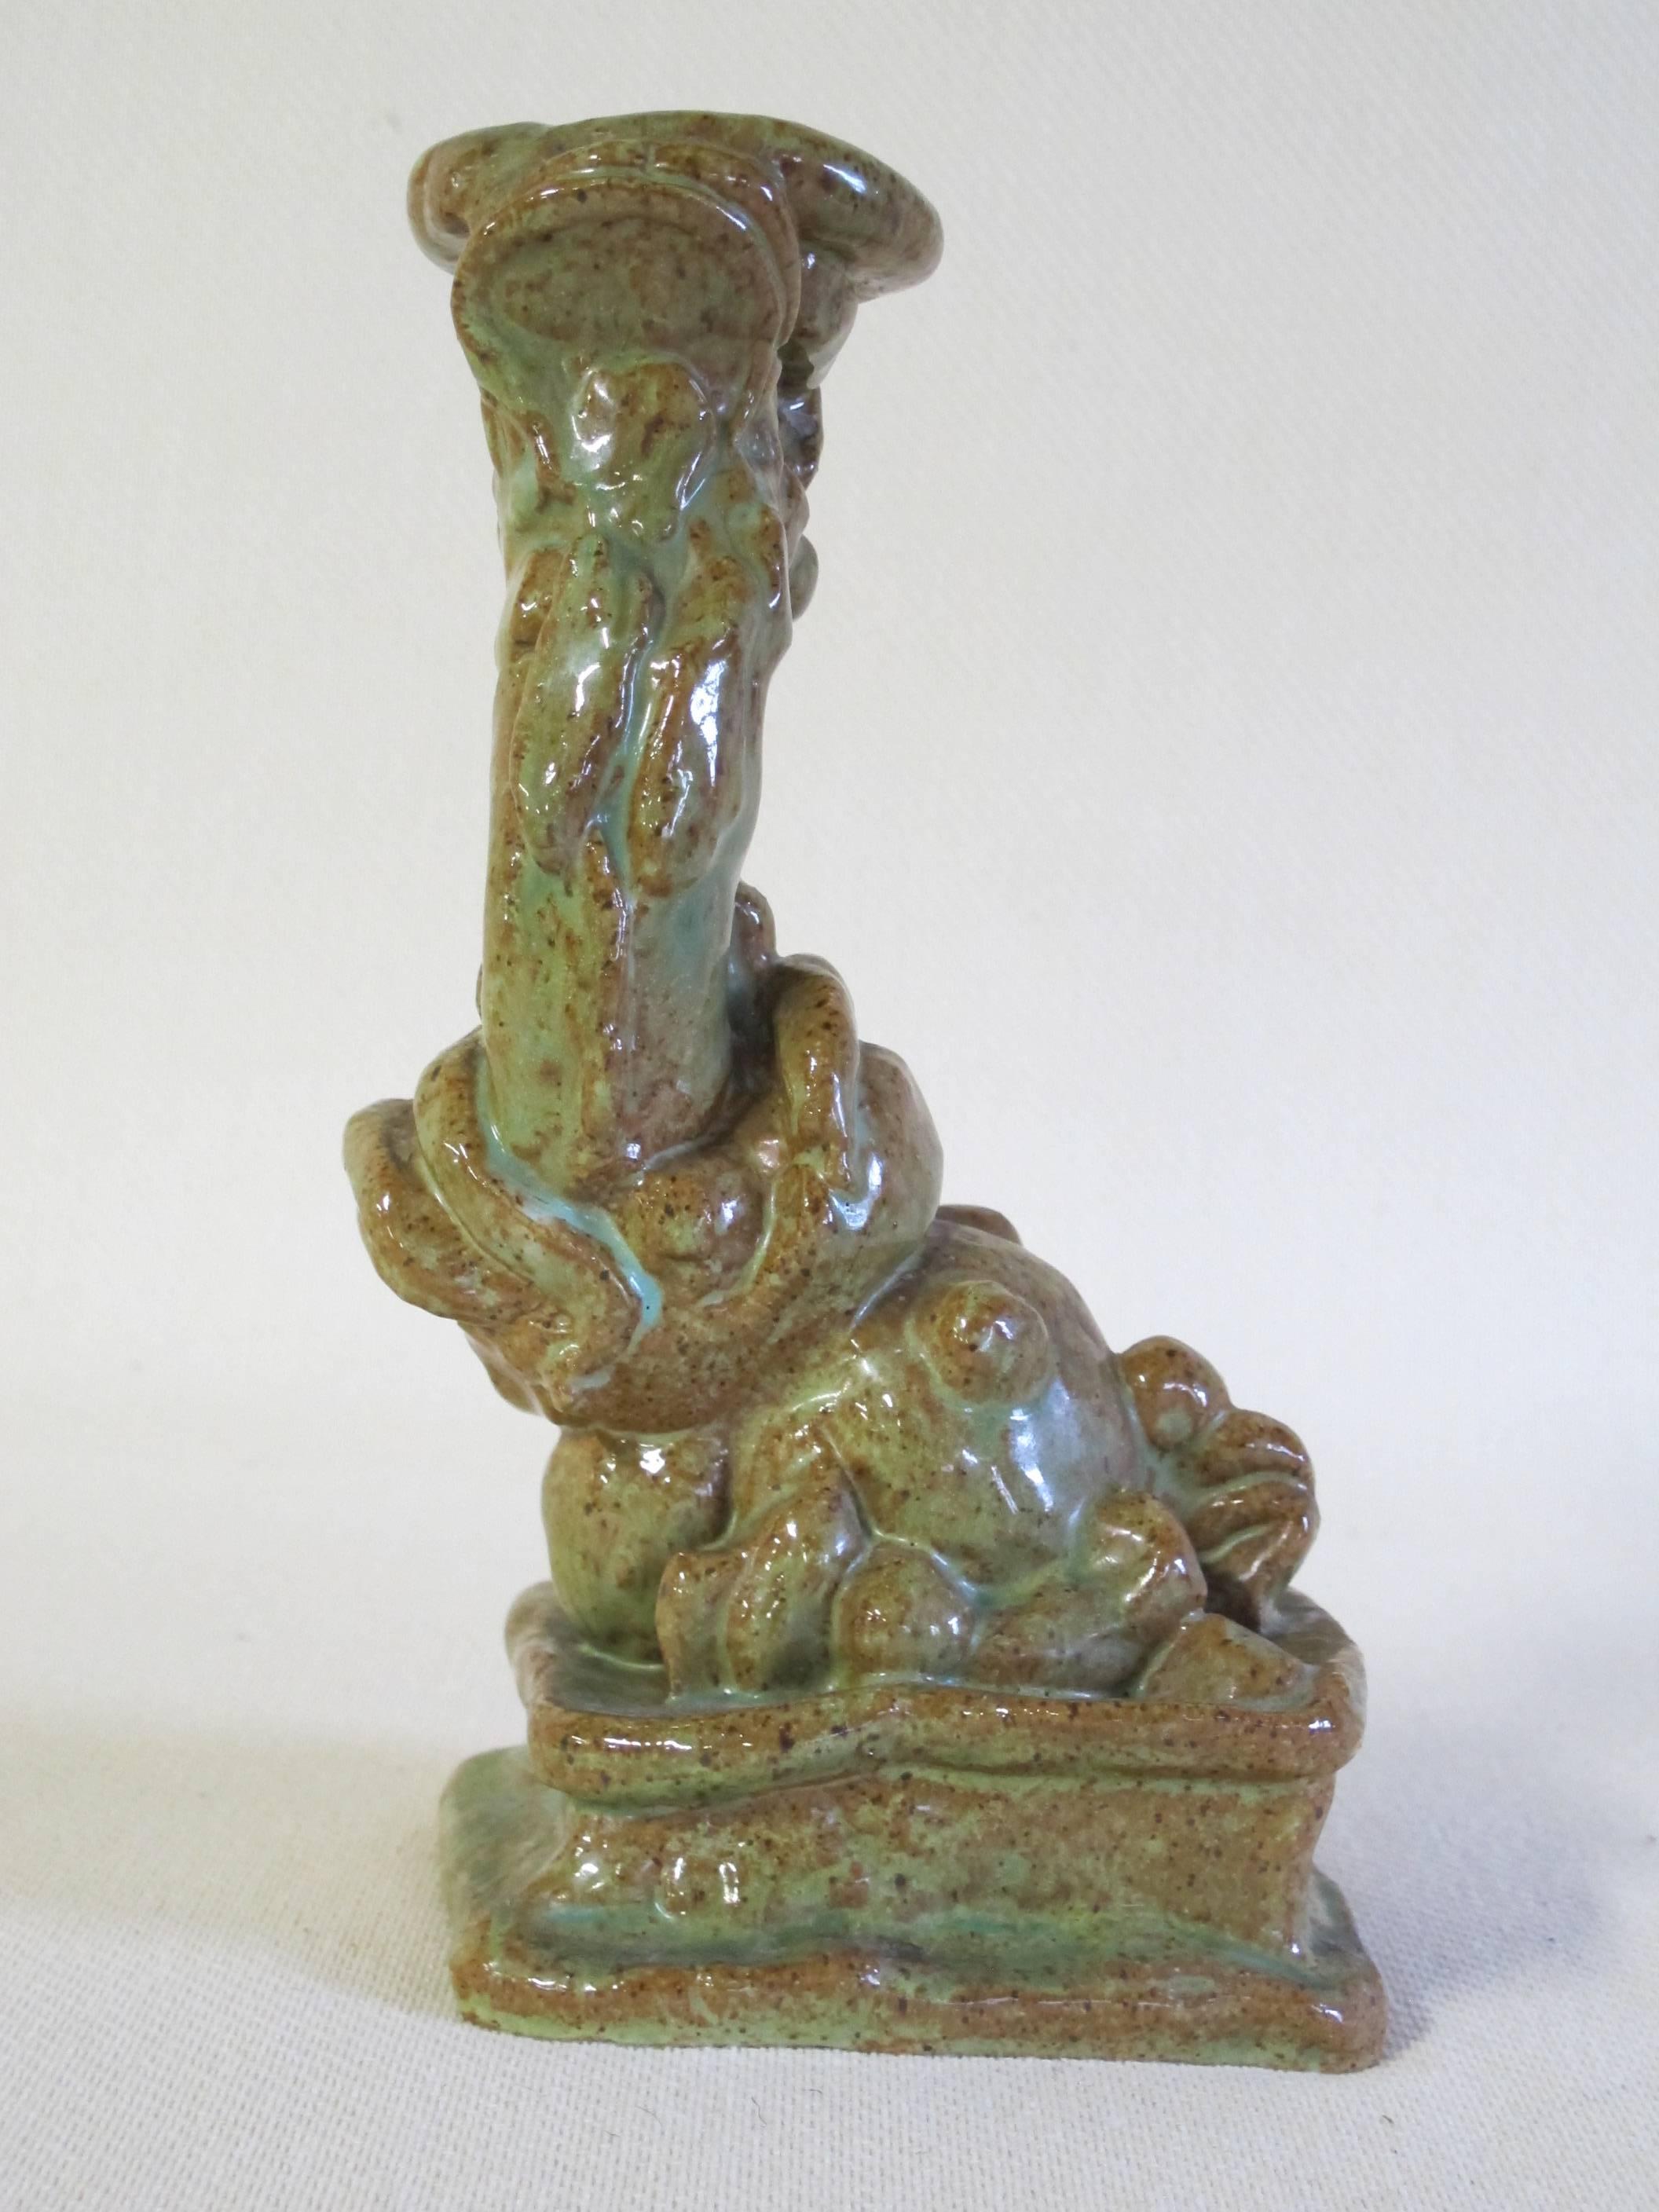 Ceramic candleholder of a mythological creature by Herman Heuff, designed and executed in 1936. The red clay still can be seen through the greenish glaze, which tends to a playful effect.

Carved in the bottom is the mark 'HH' in a circle, for